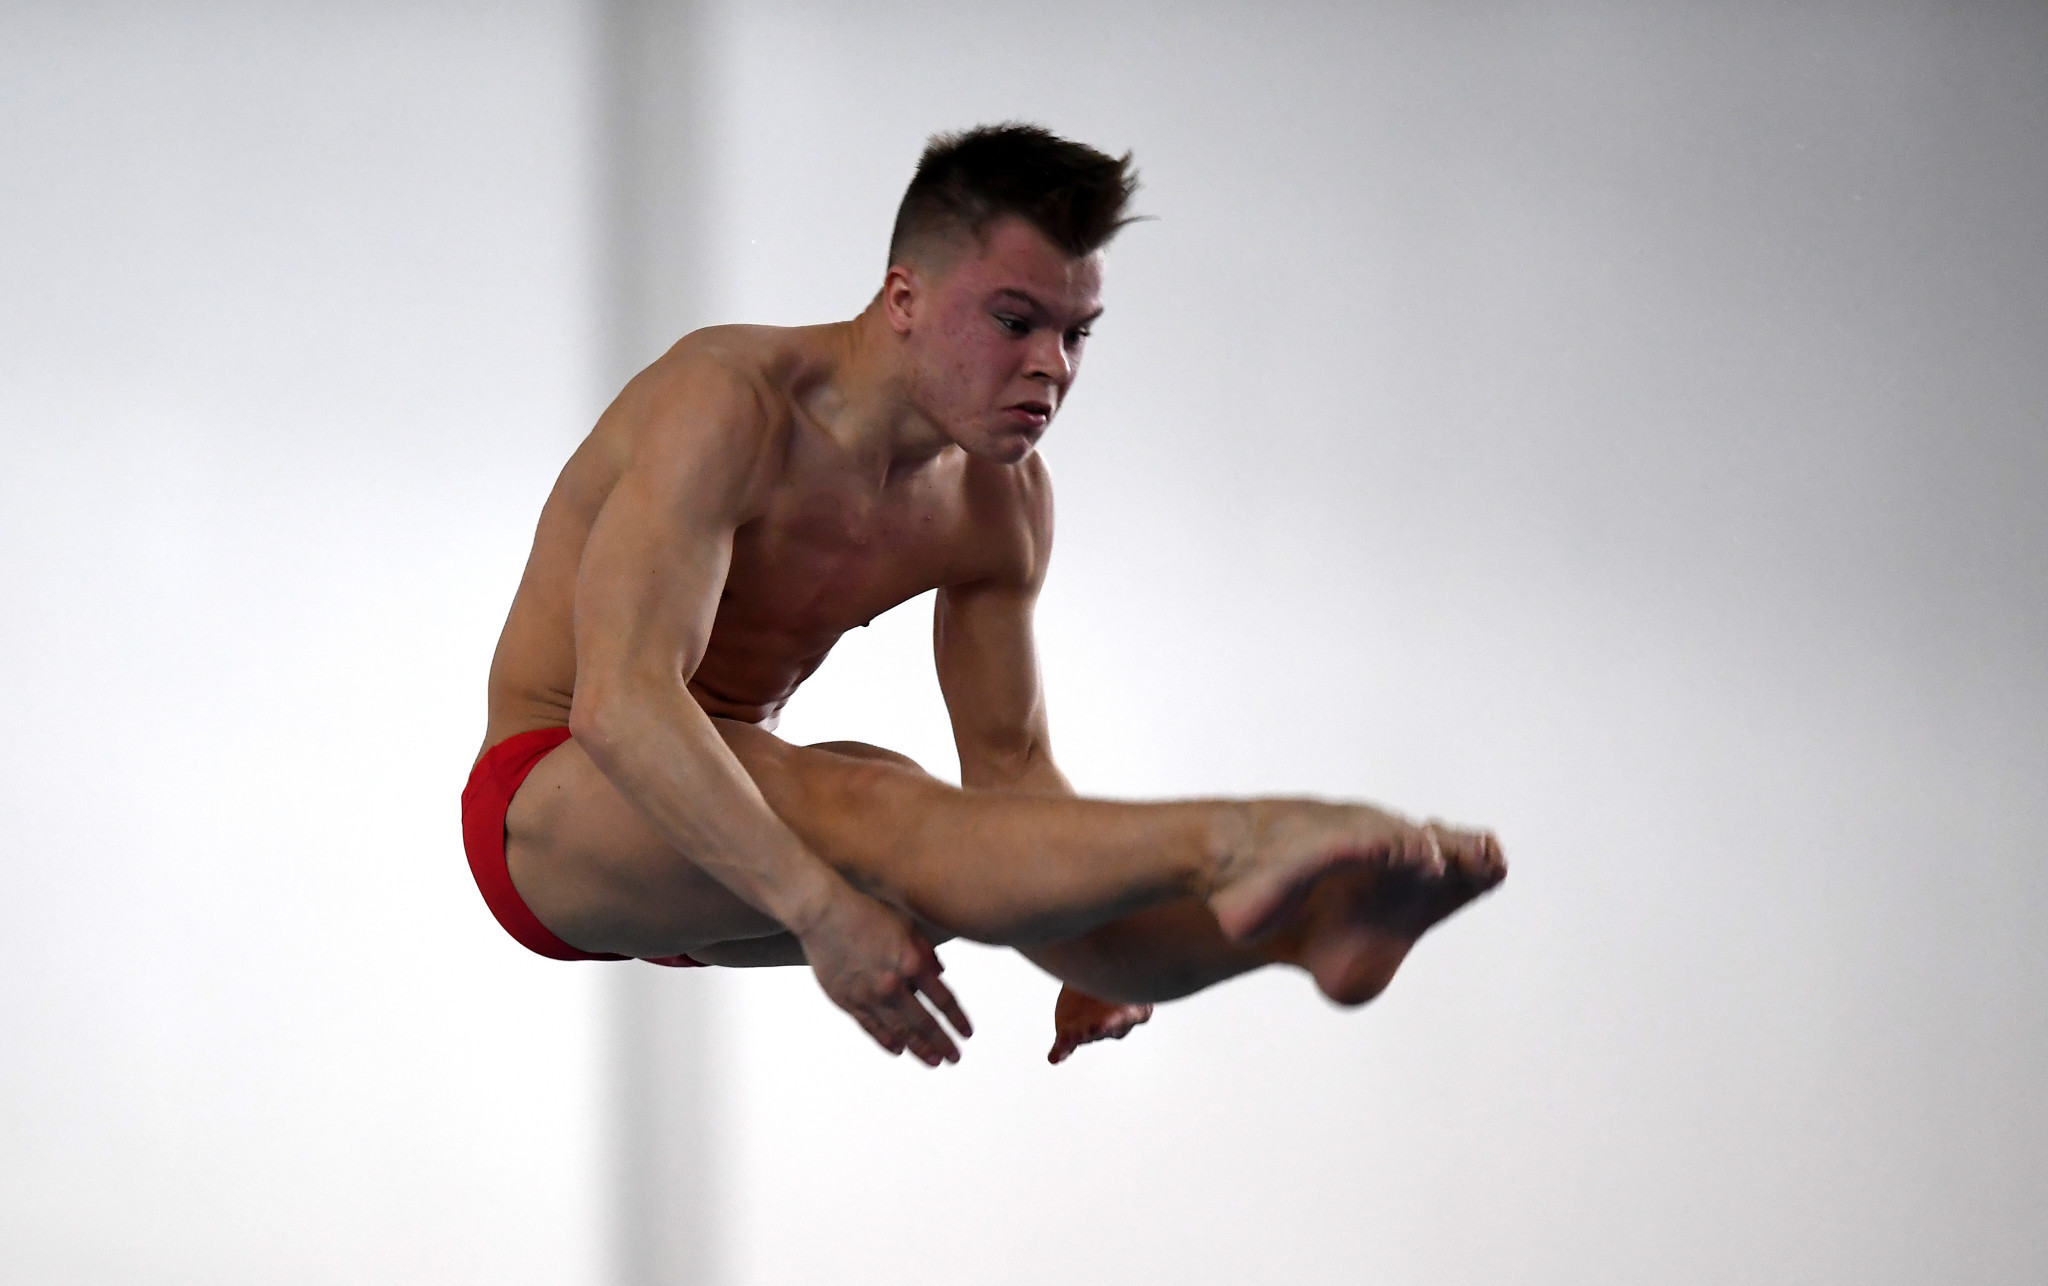 Cameron Gammage was among two British divers to grab medals today as he earned silver in the men's 3m springboard ©Getty Images